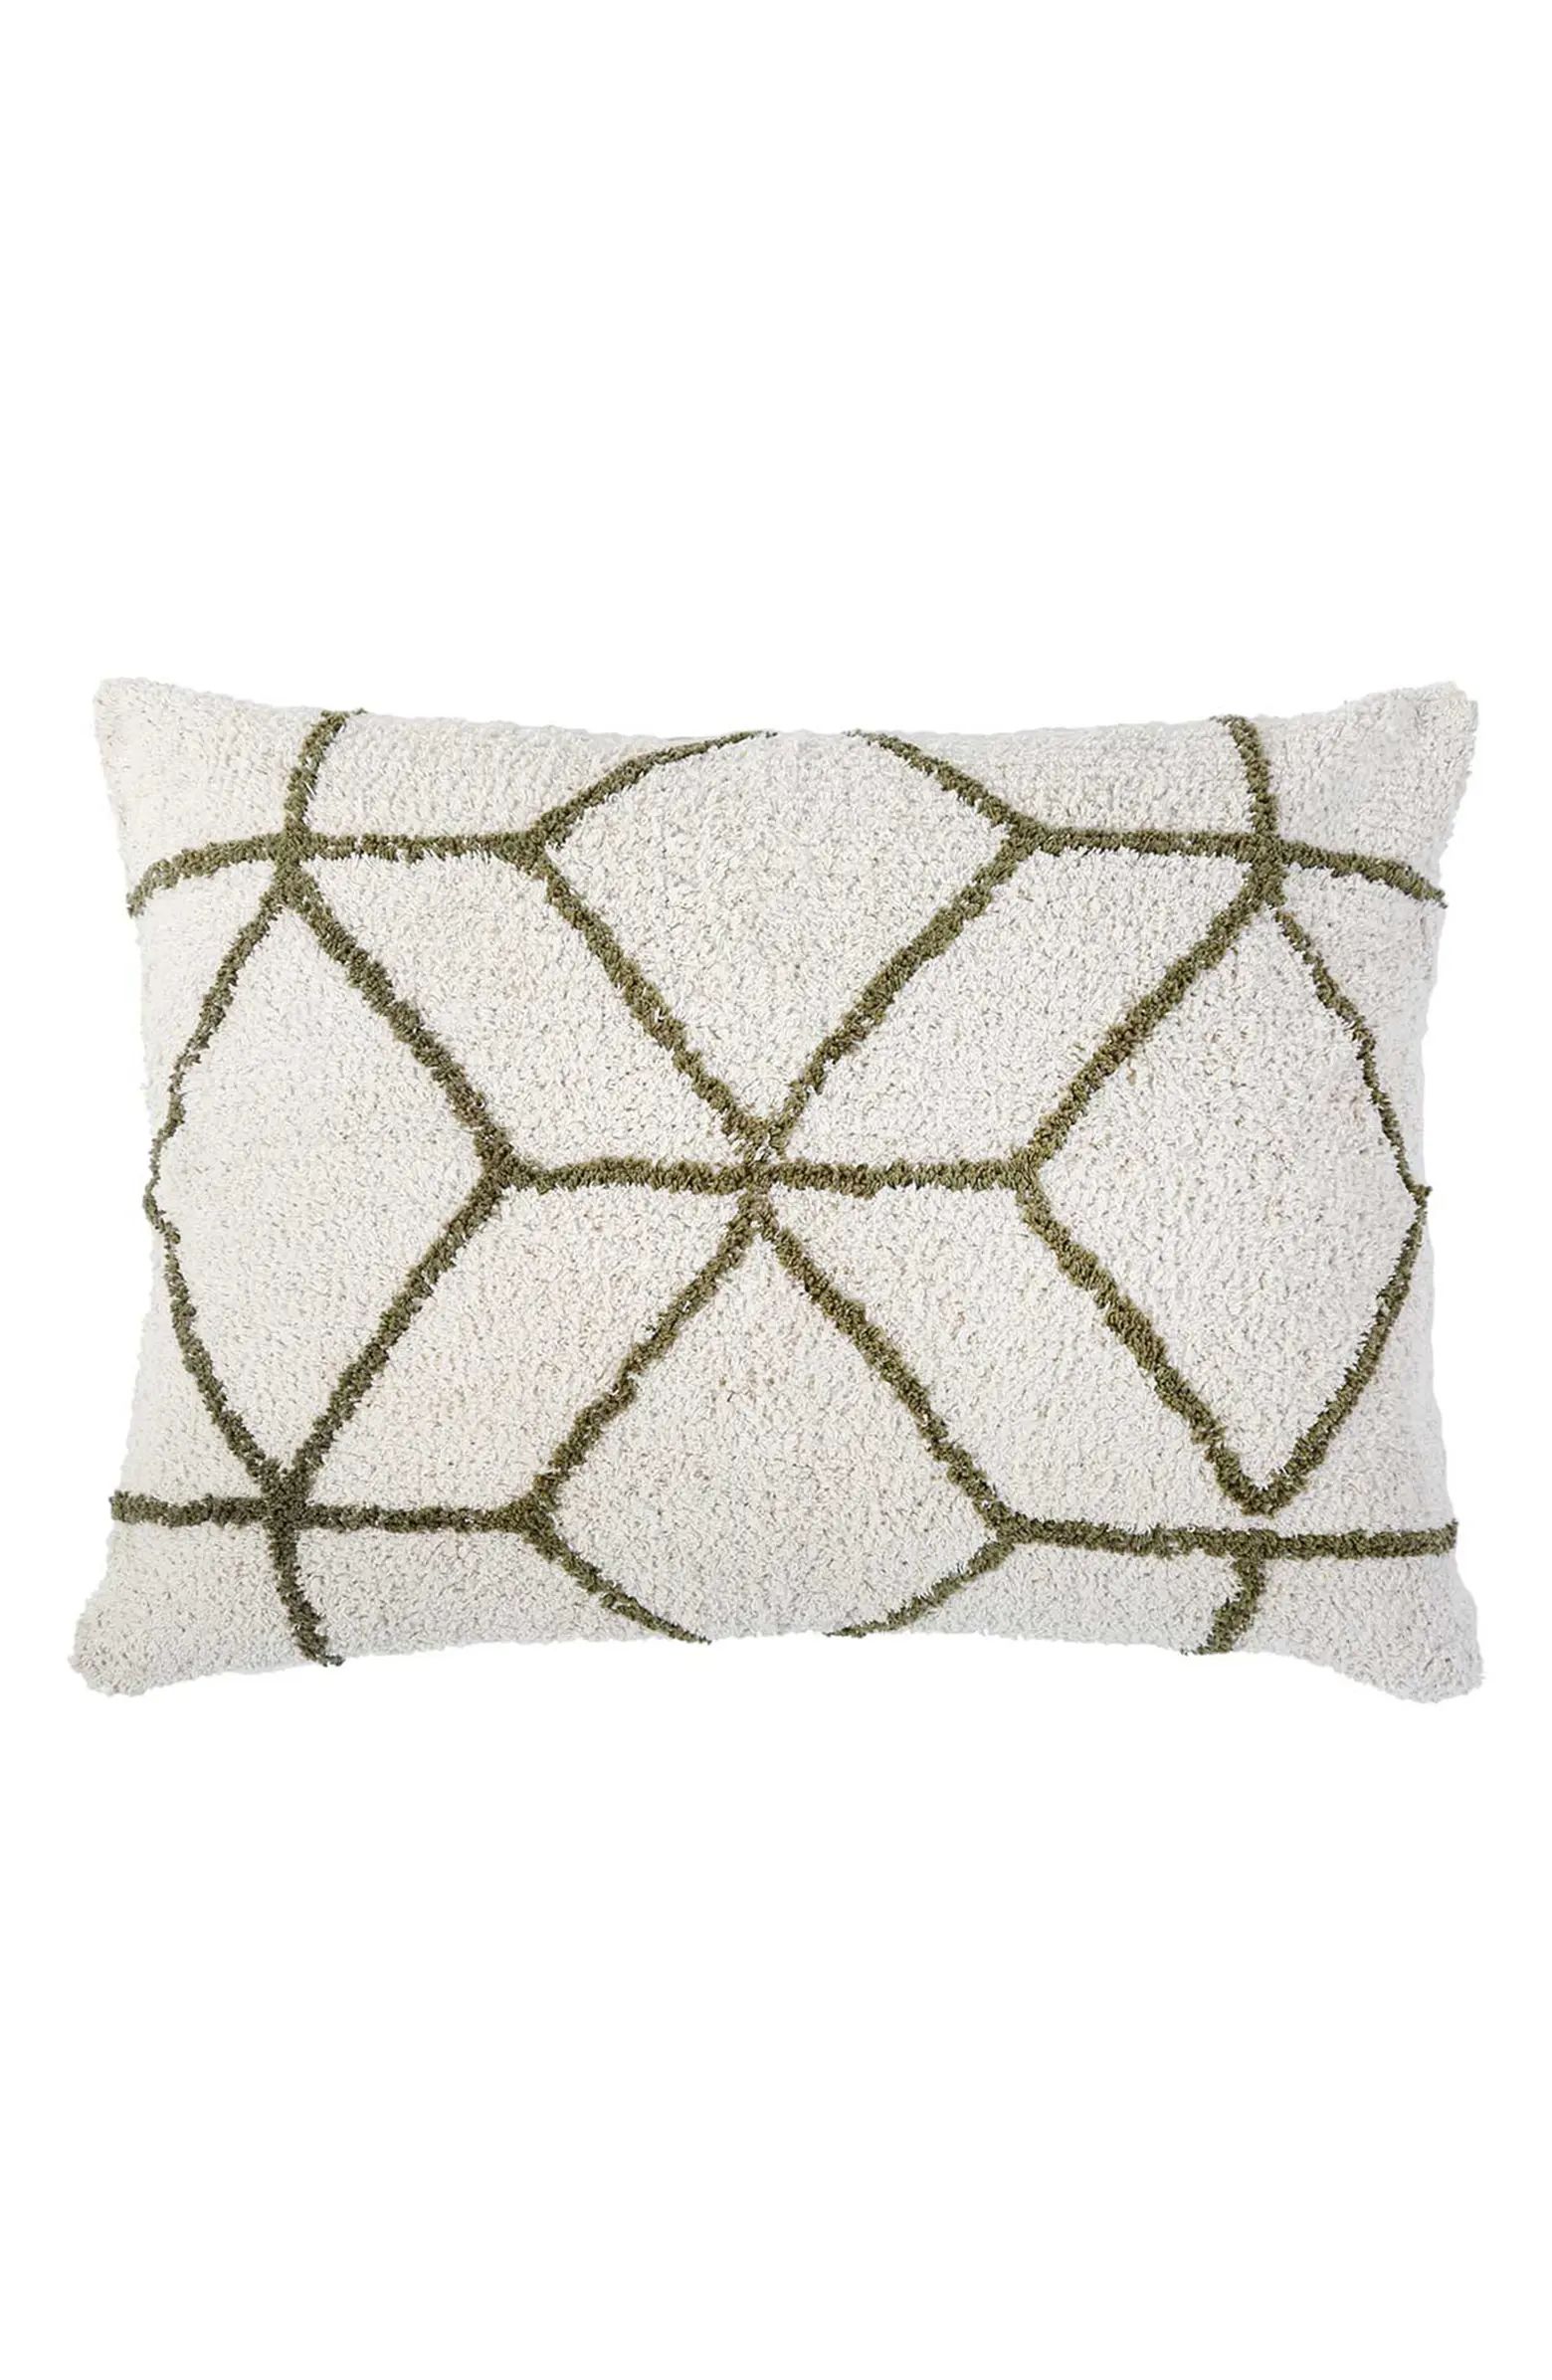 Pom Pom at Home Big Geo Pattern Plush Accent Pillow | Nordstrom | Nordstrom